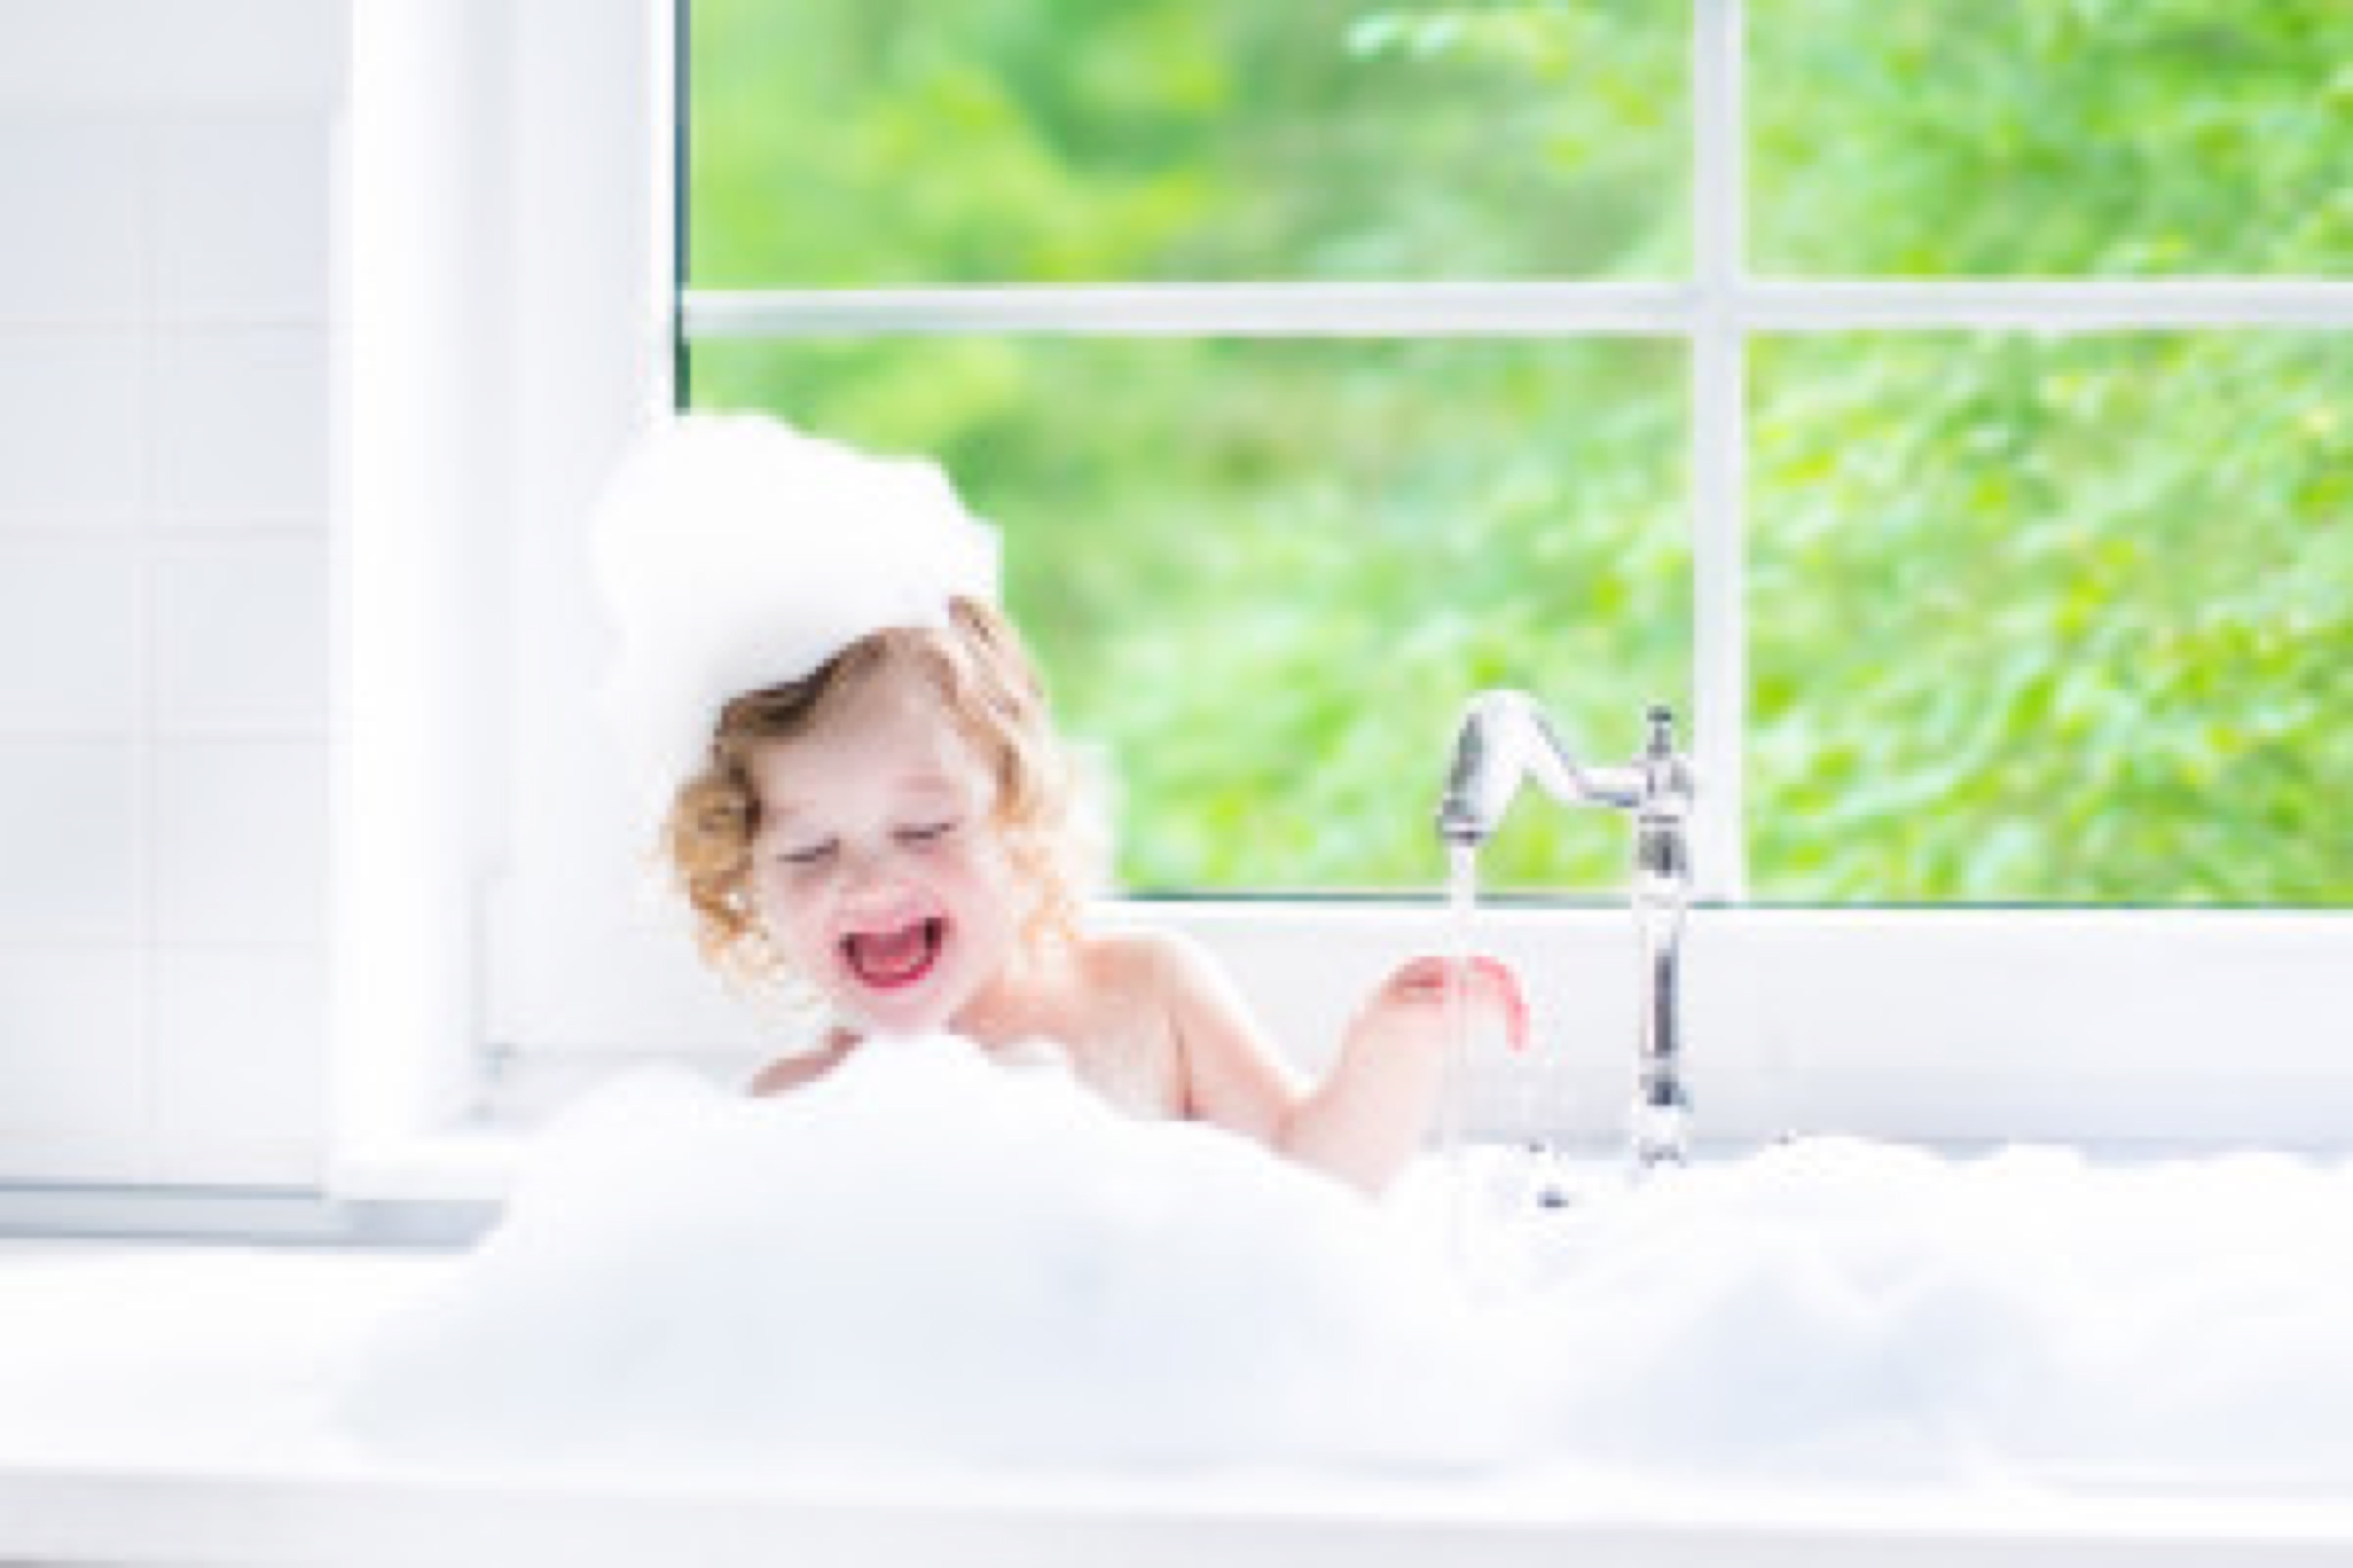 Child taking bath. Little baby in a bath tub washing hair with shampoo and soap. Kids playing with foam and water splashes. White bathroom with window. Clean kid after shower. Children hygiene.